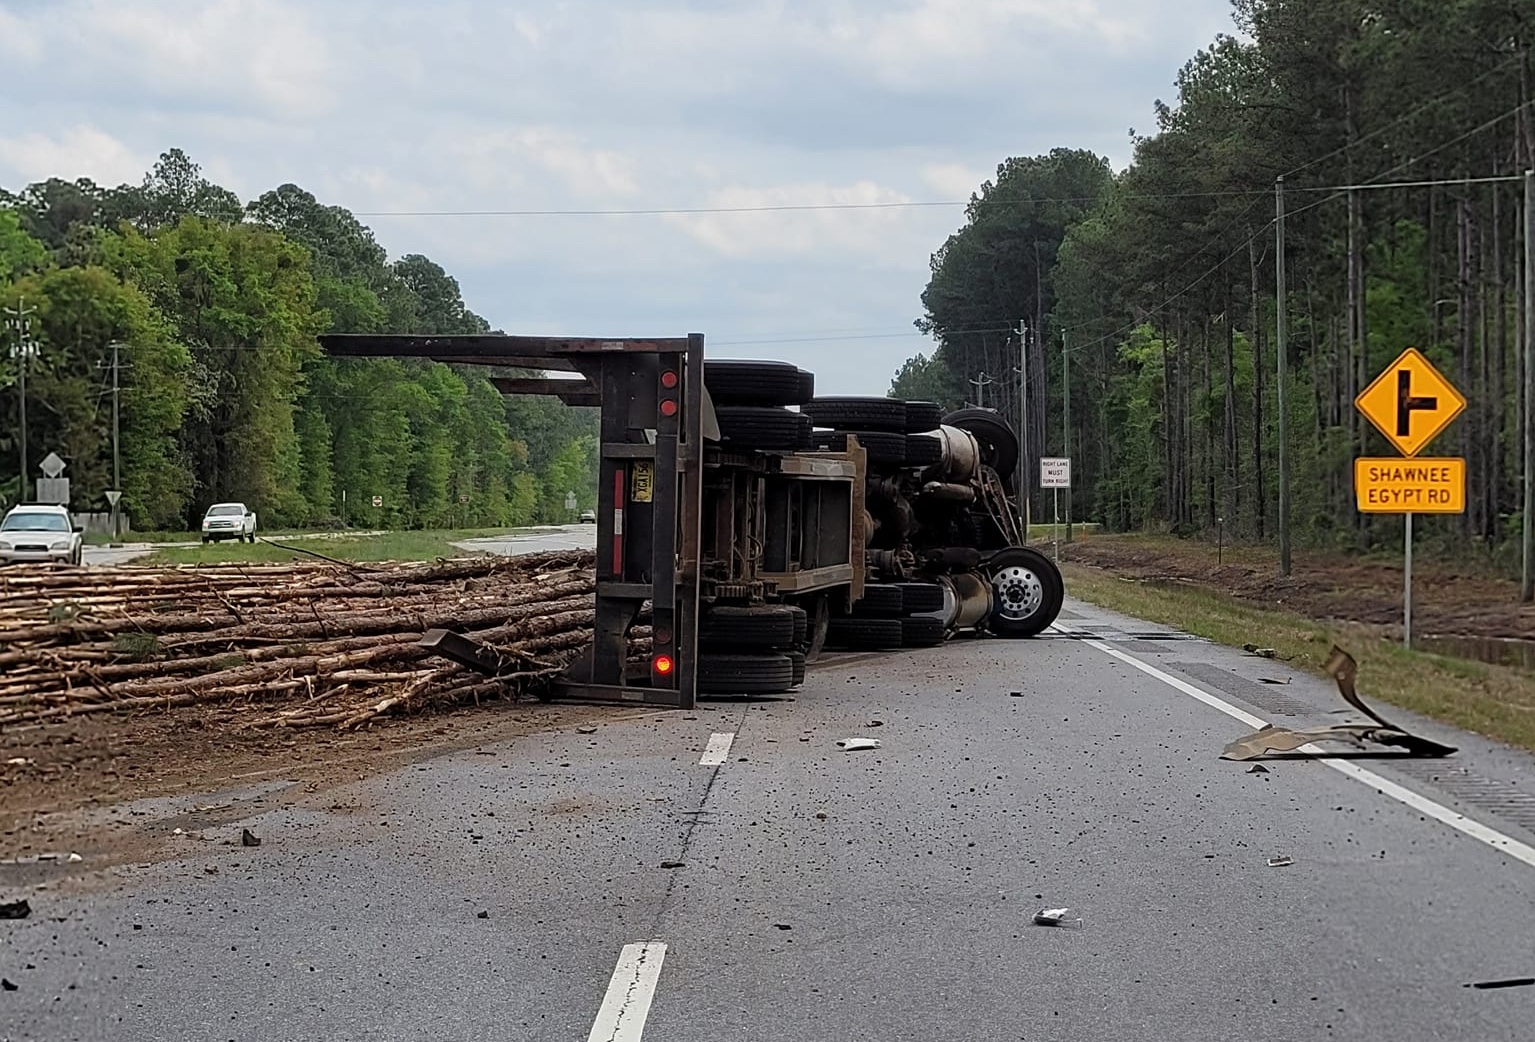 Overturned Log Truck in Effingham County: What We Know